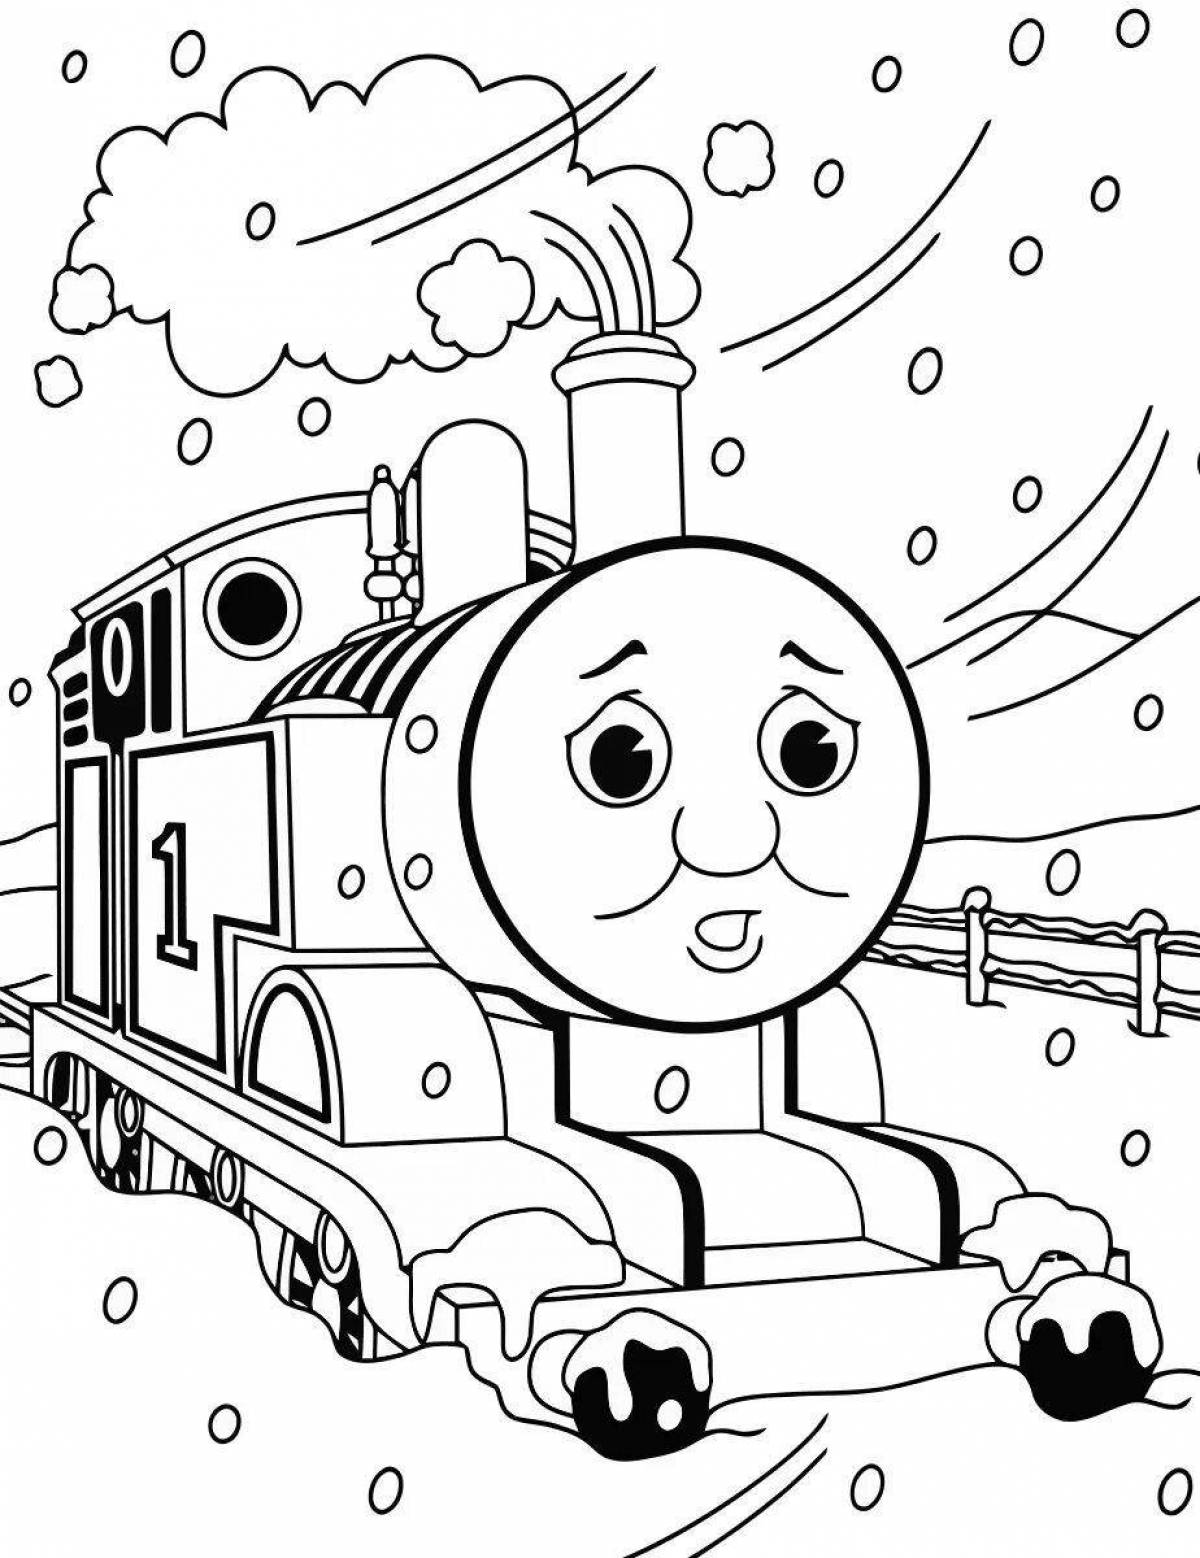 Thomas' adorable coloring book for kids